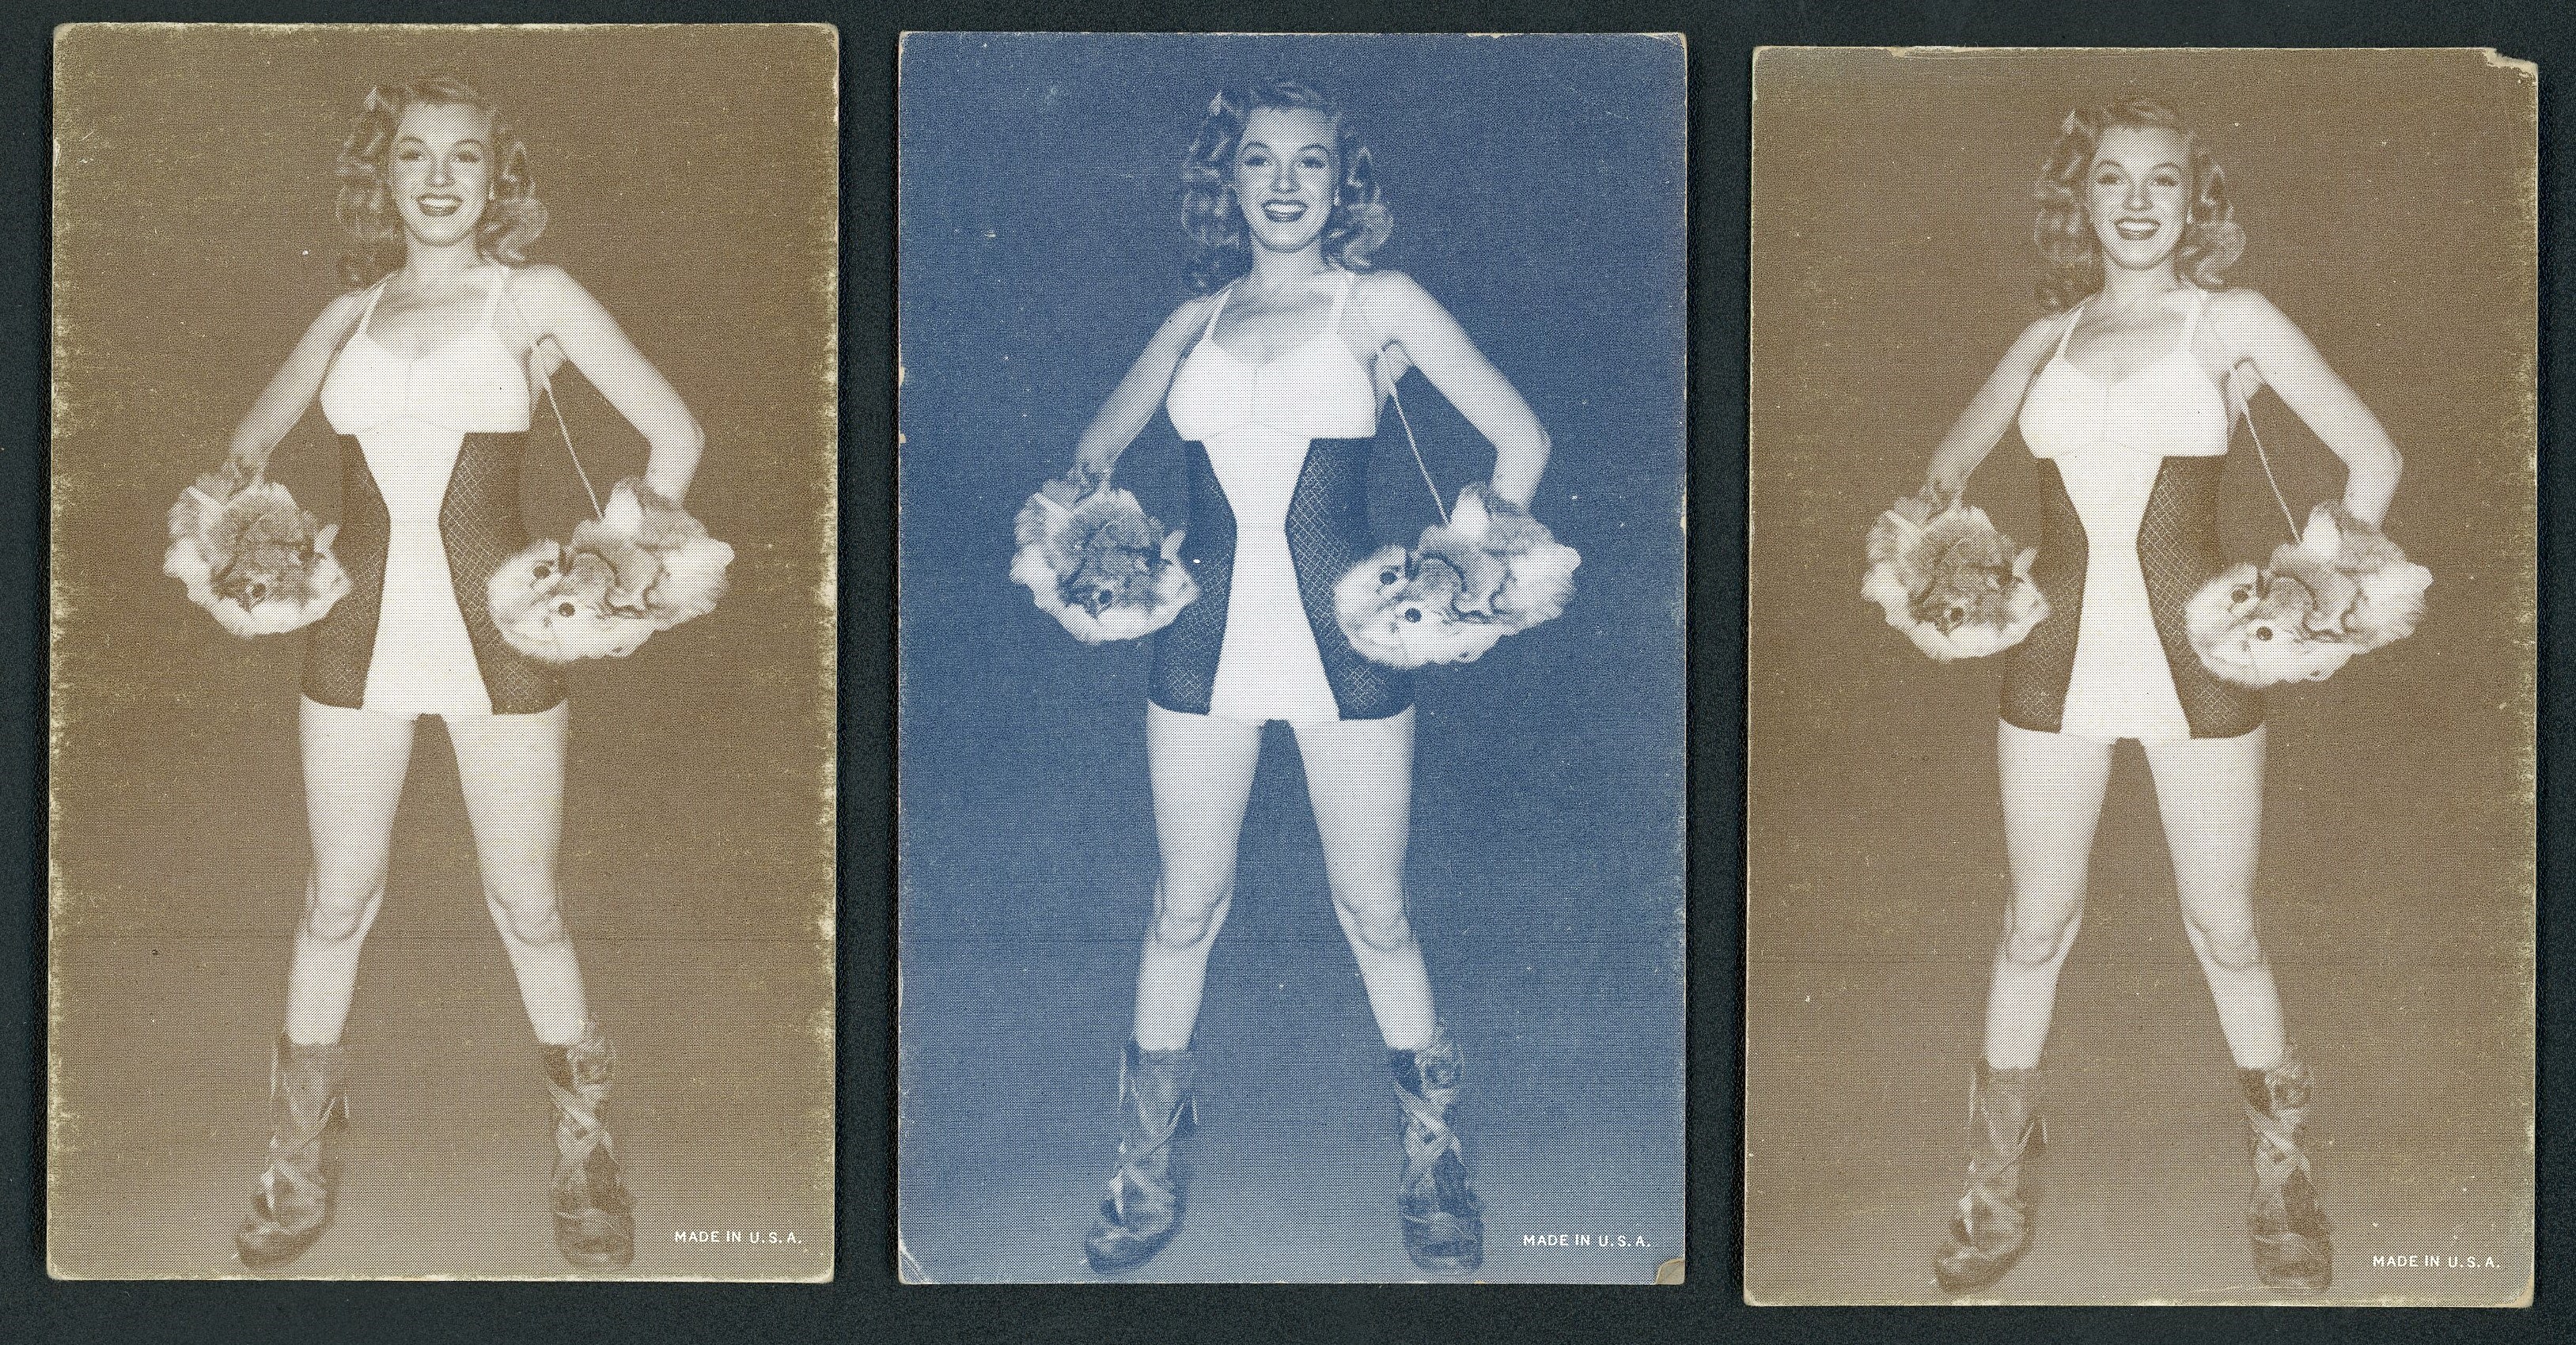 Baseball and Trading Cards - 1950s Marilyn Monroe Exhibit Card Collection of 6 - Rare!